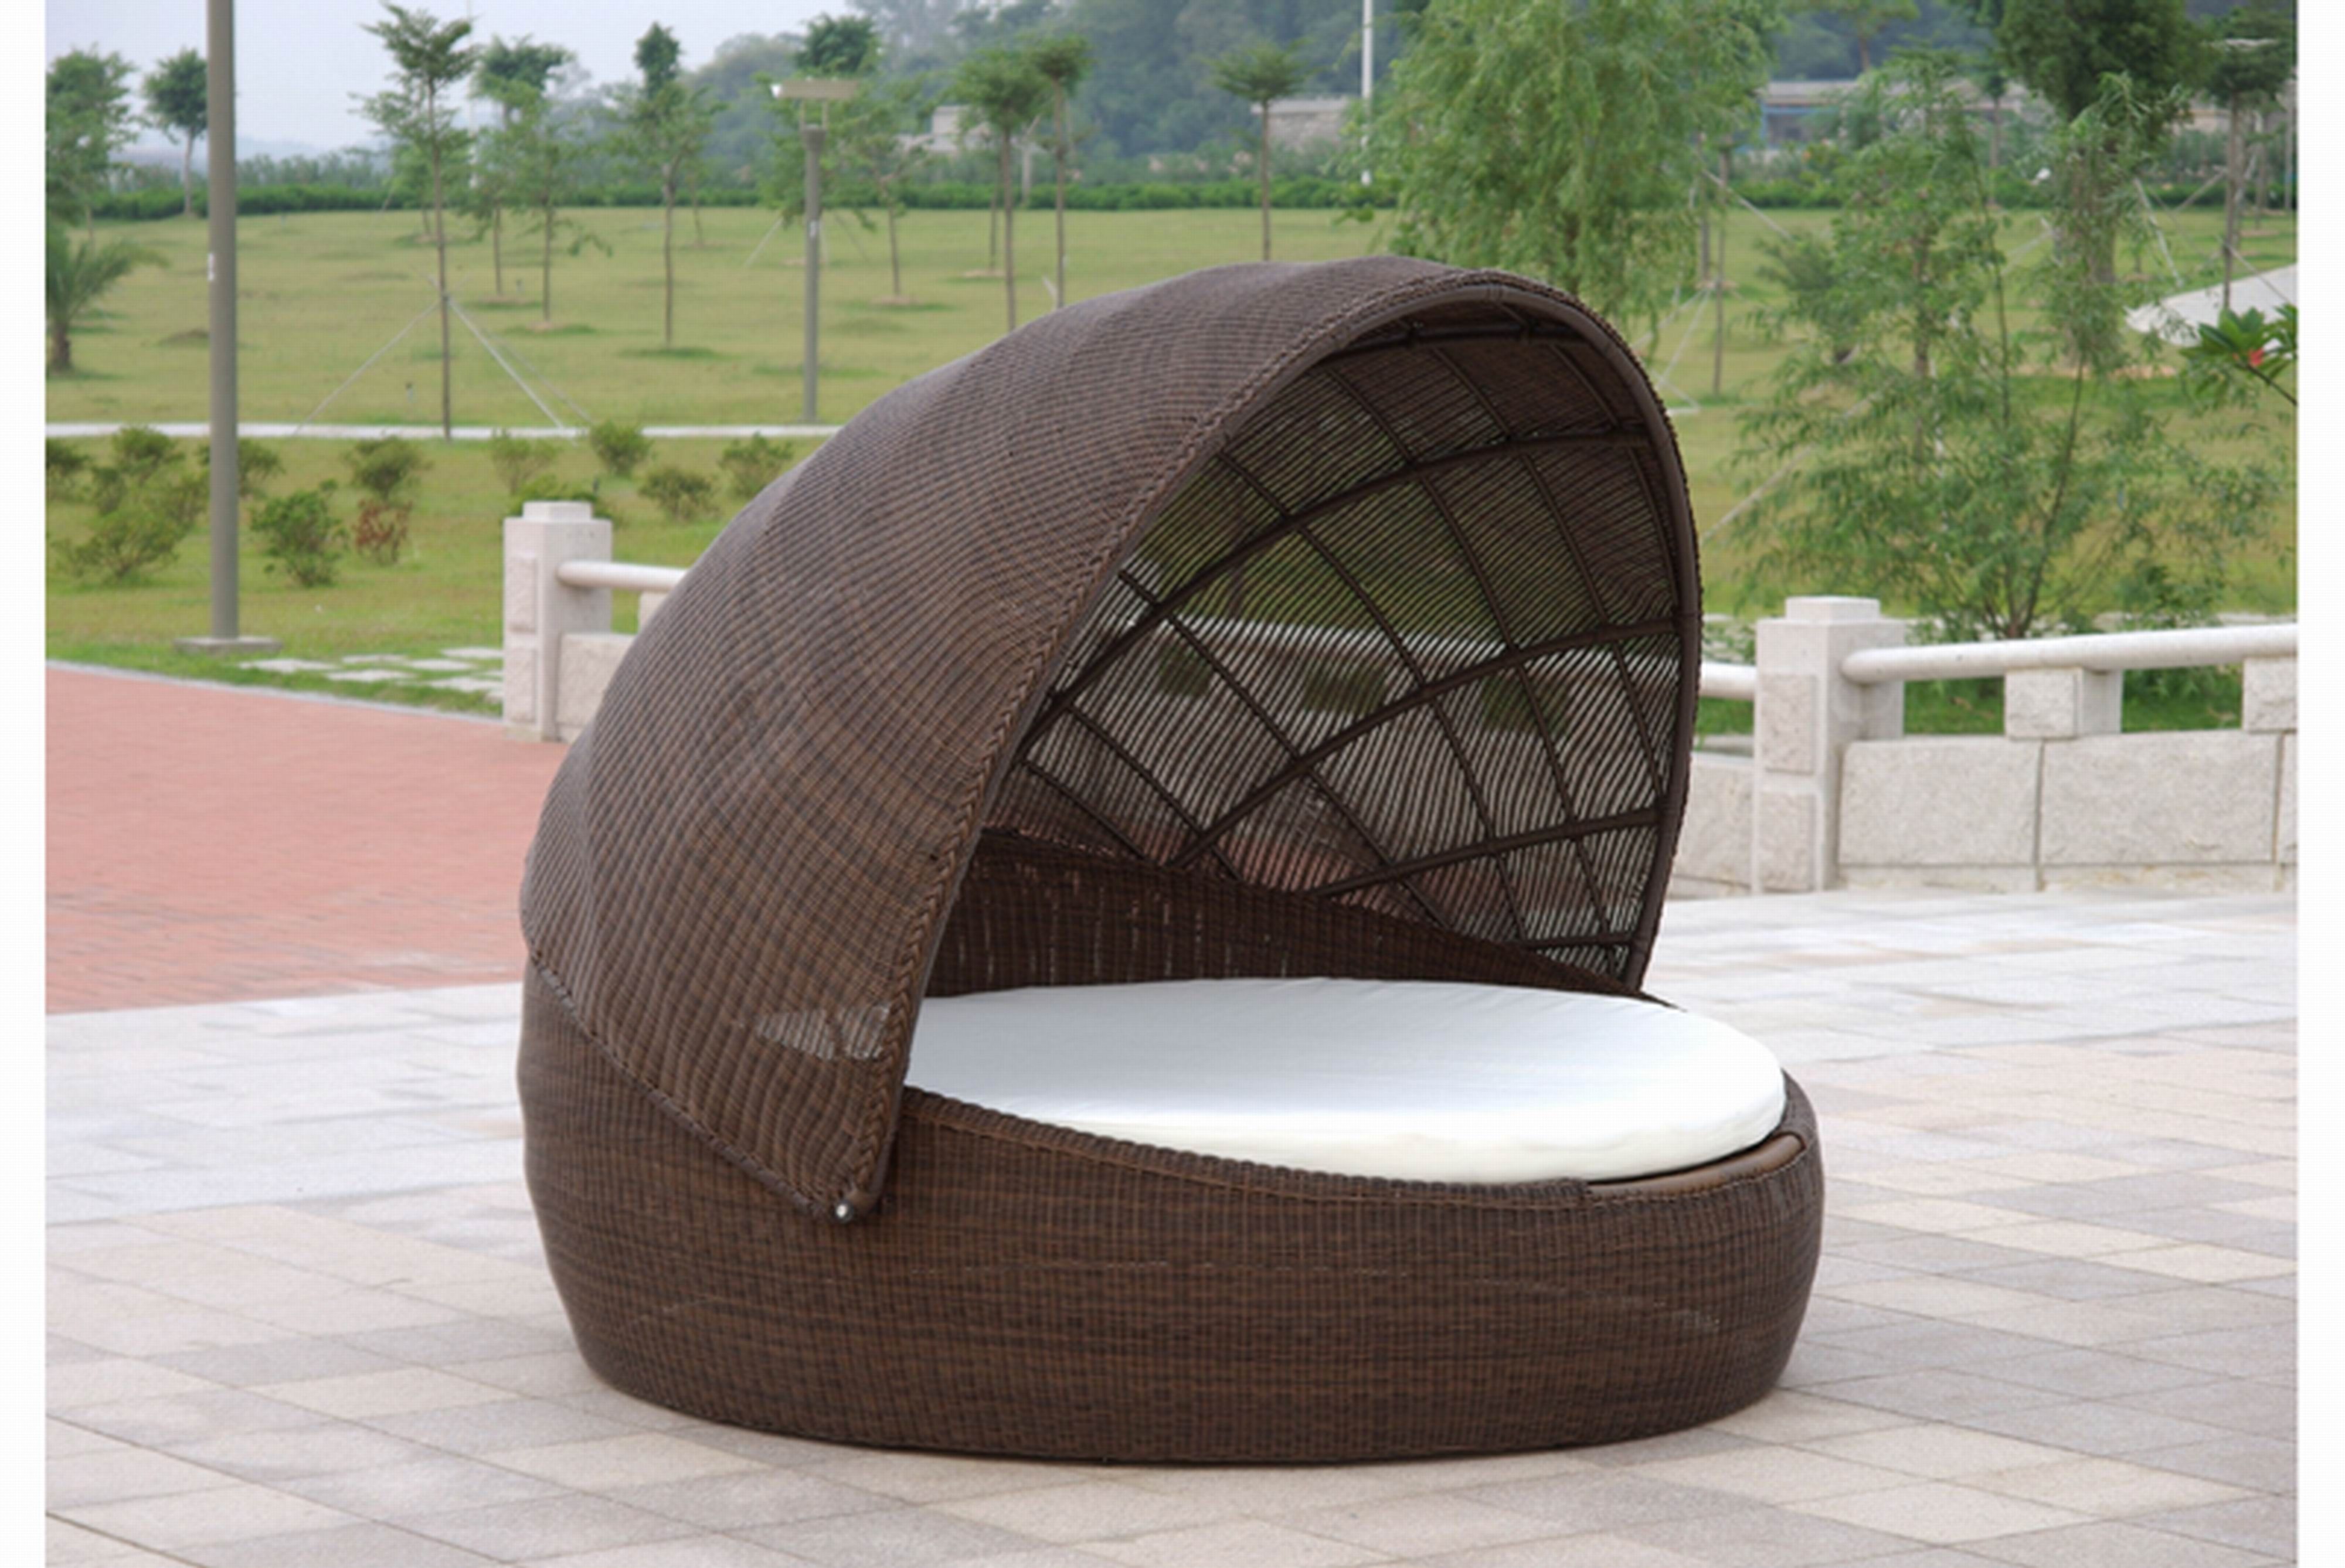 Chaise Lounge Chair With Canopy Inside 2018 Canopy Lounge Chair Outdoor • Lounge Chairs Ideas (View 13 of 15)